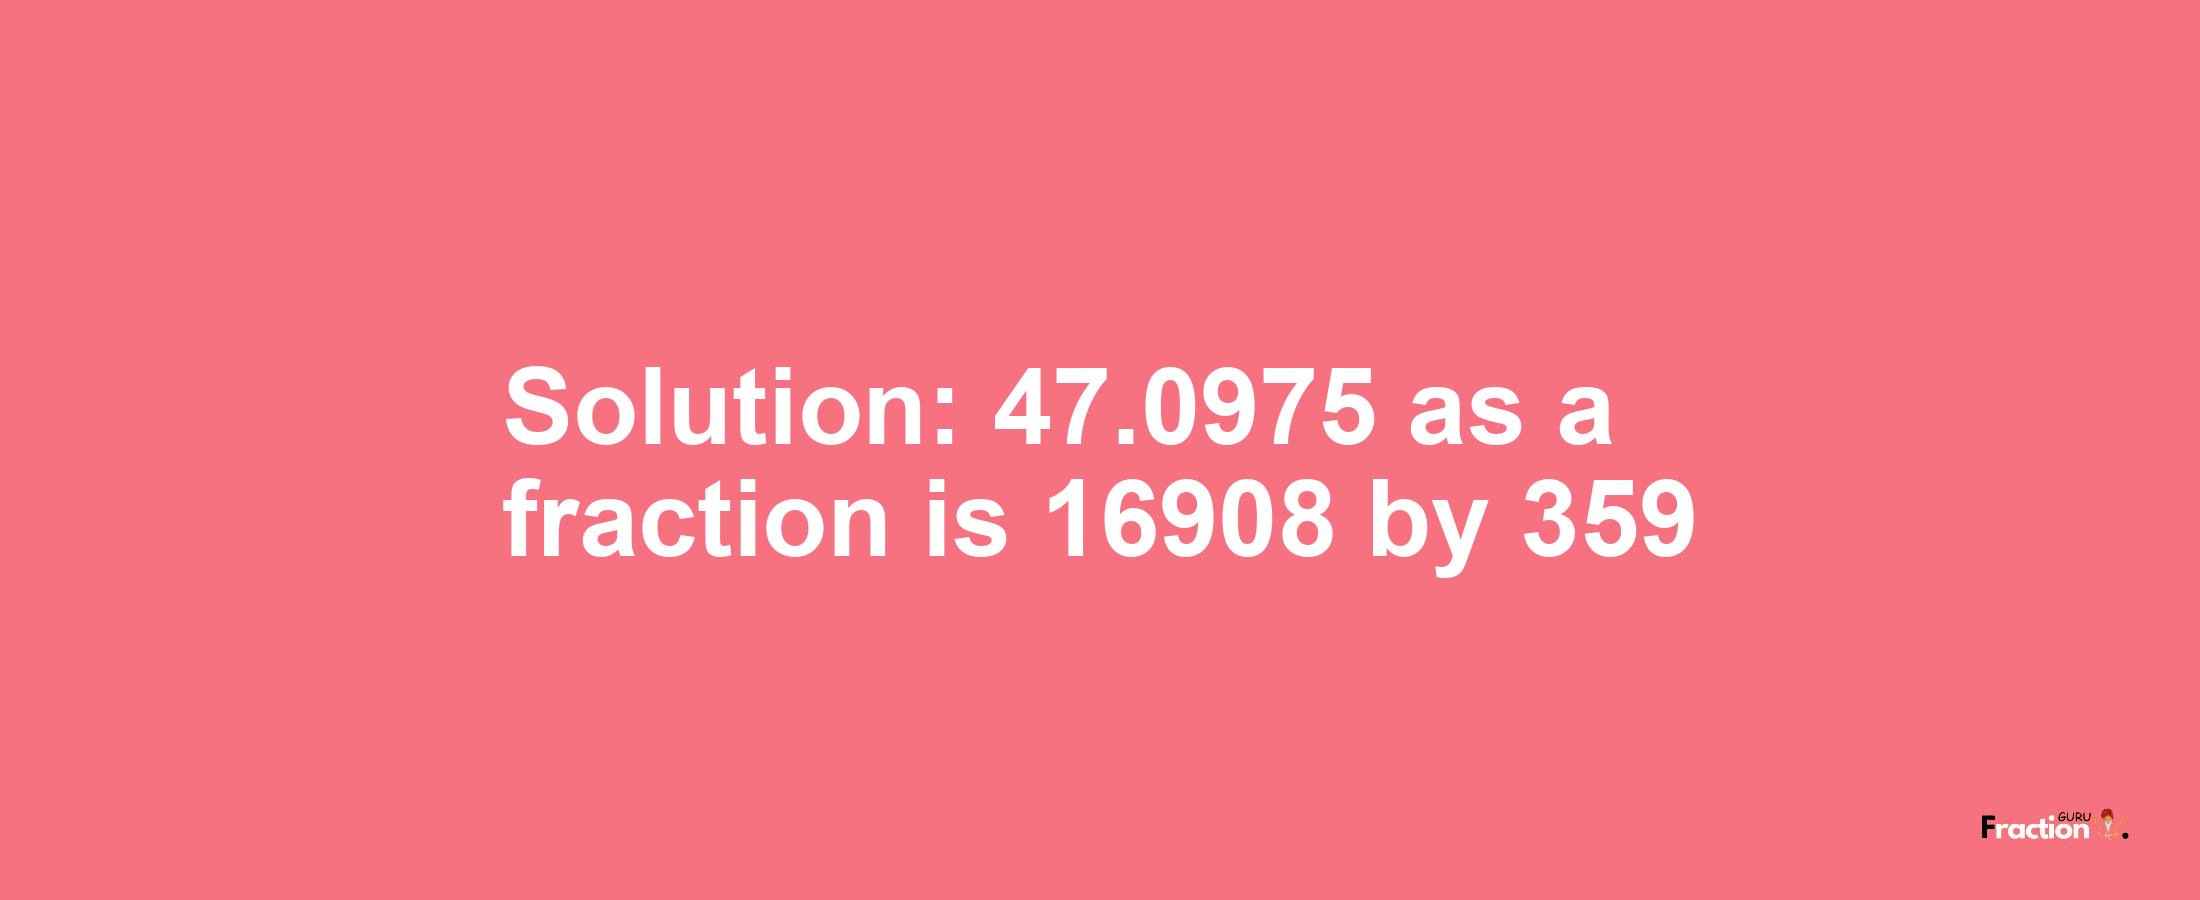 Solution:47.0975 as a fraction is 16908/359